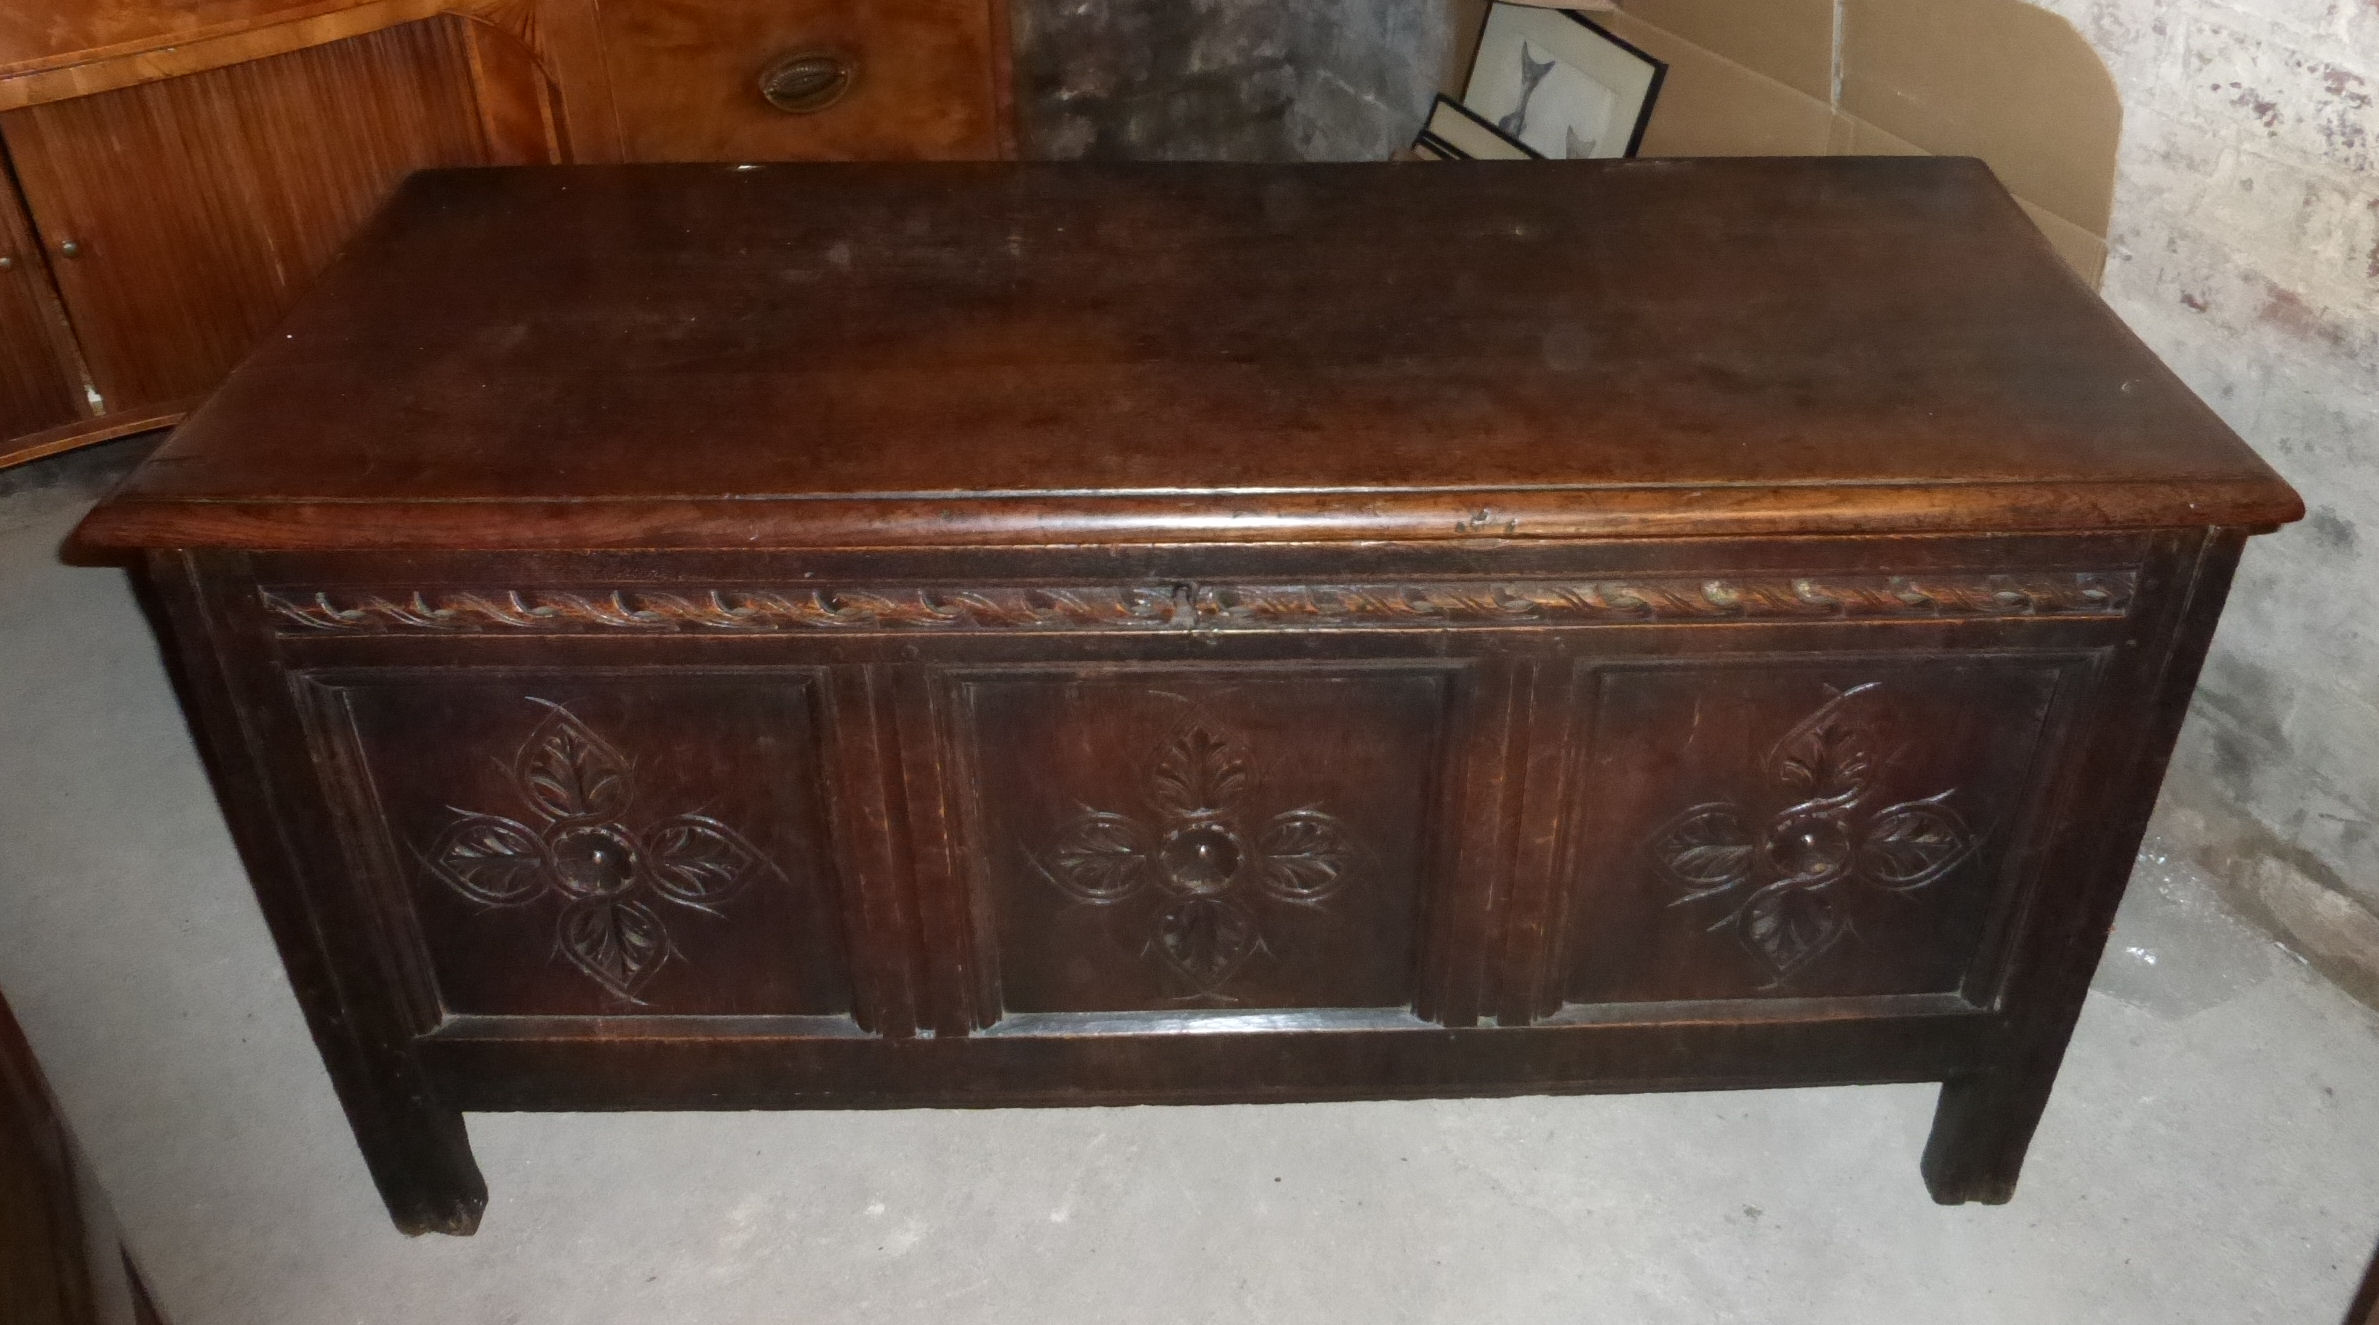 An 18th century oak Coffer with plain hinged lid, the triple panel front with stylised floral